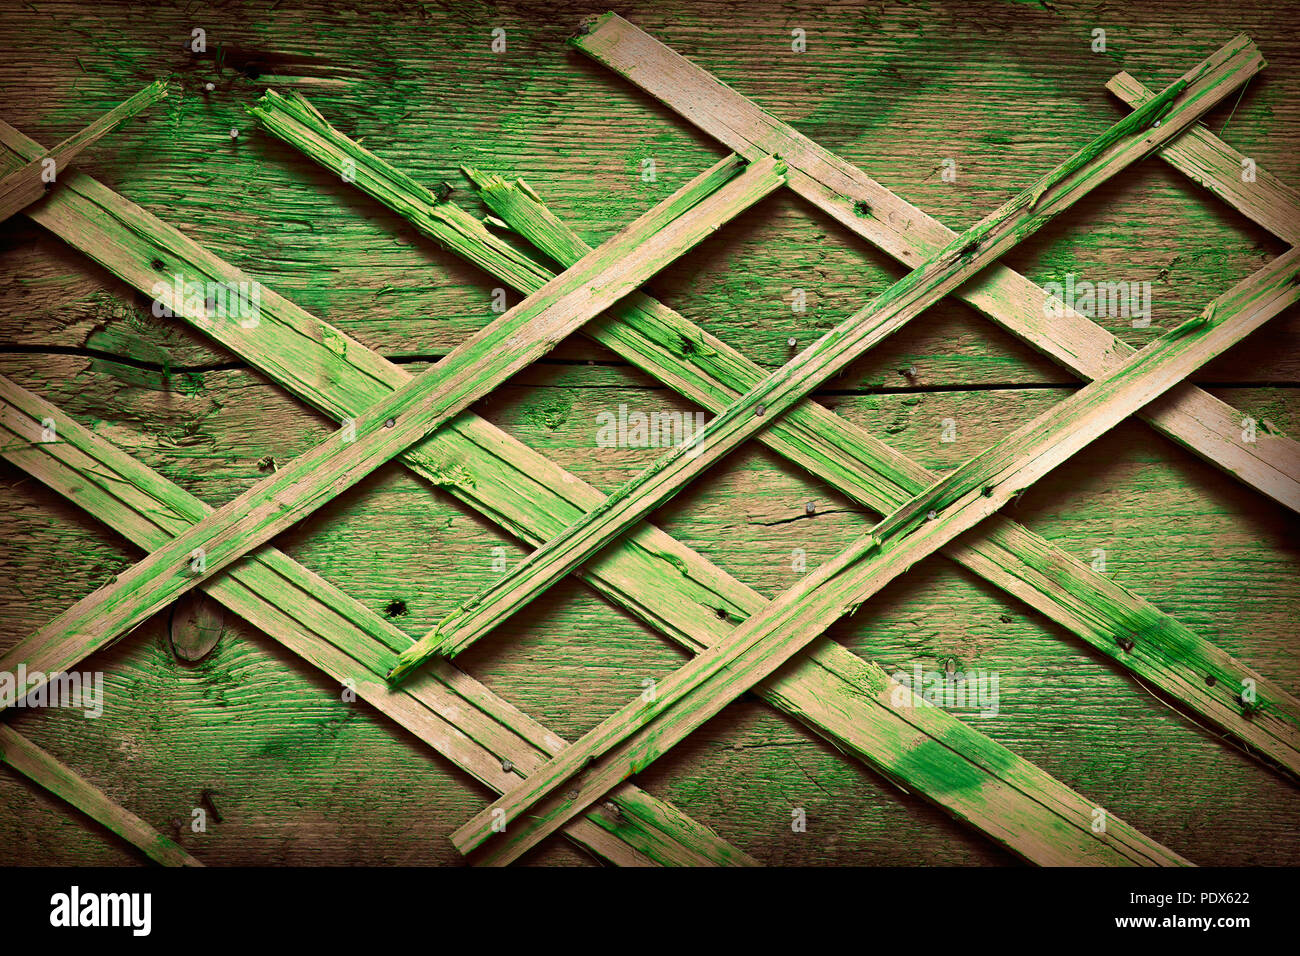 Wooden texture with shingles. Stock Photo